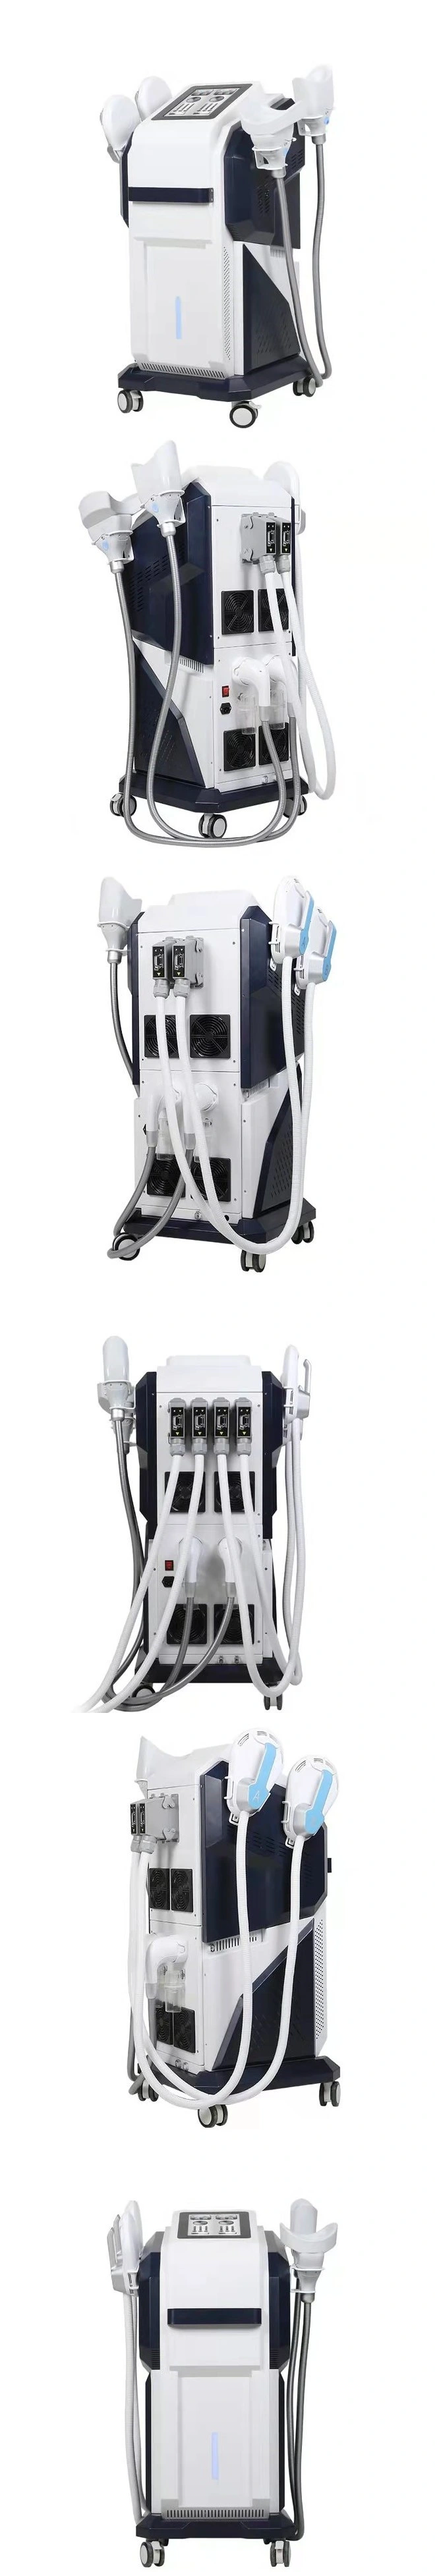 4D Cryolipolysis EMS Therapy Machine with Electromagnetic Stimulation for Body Slimming